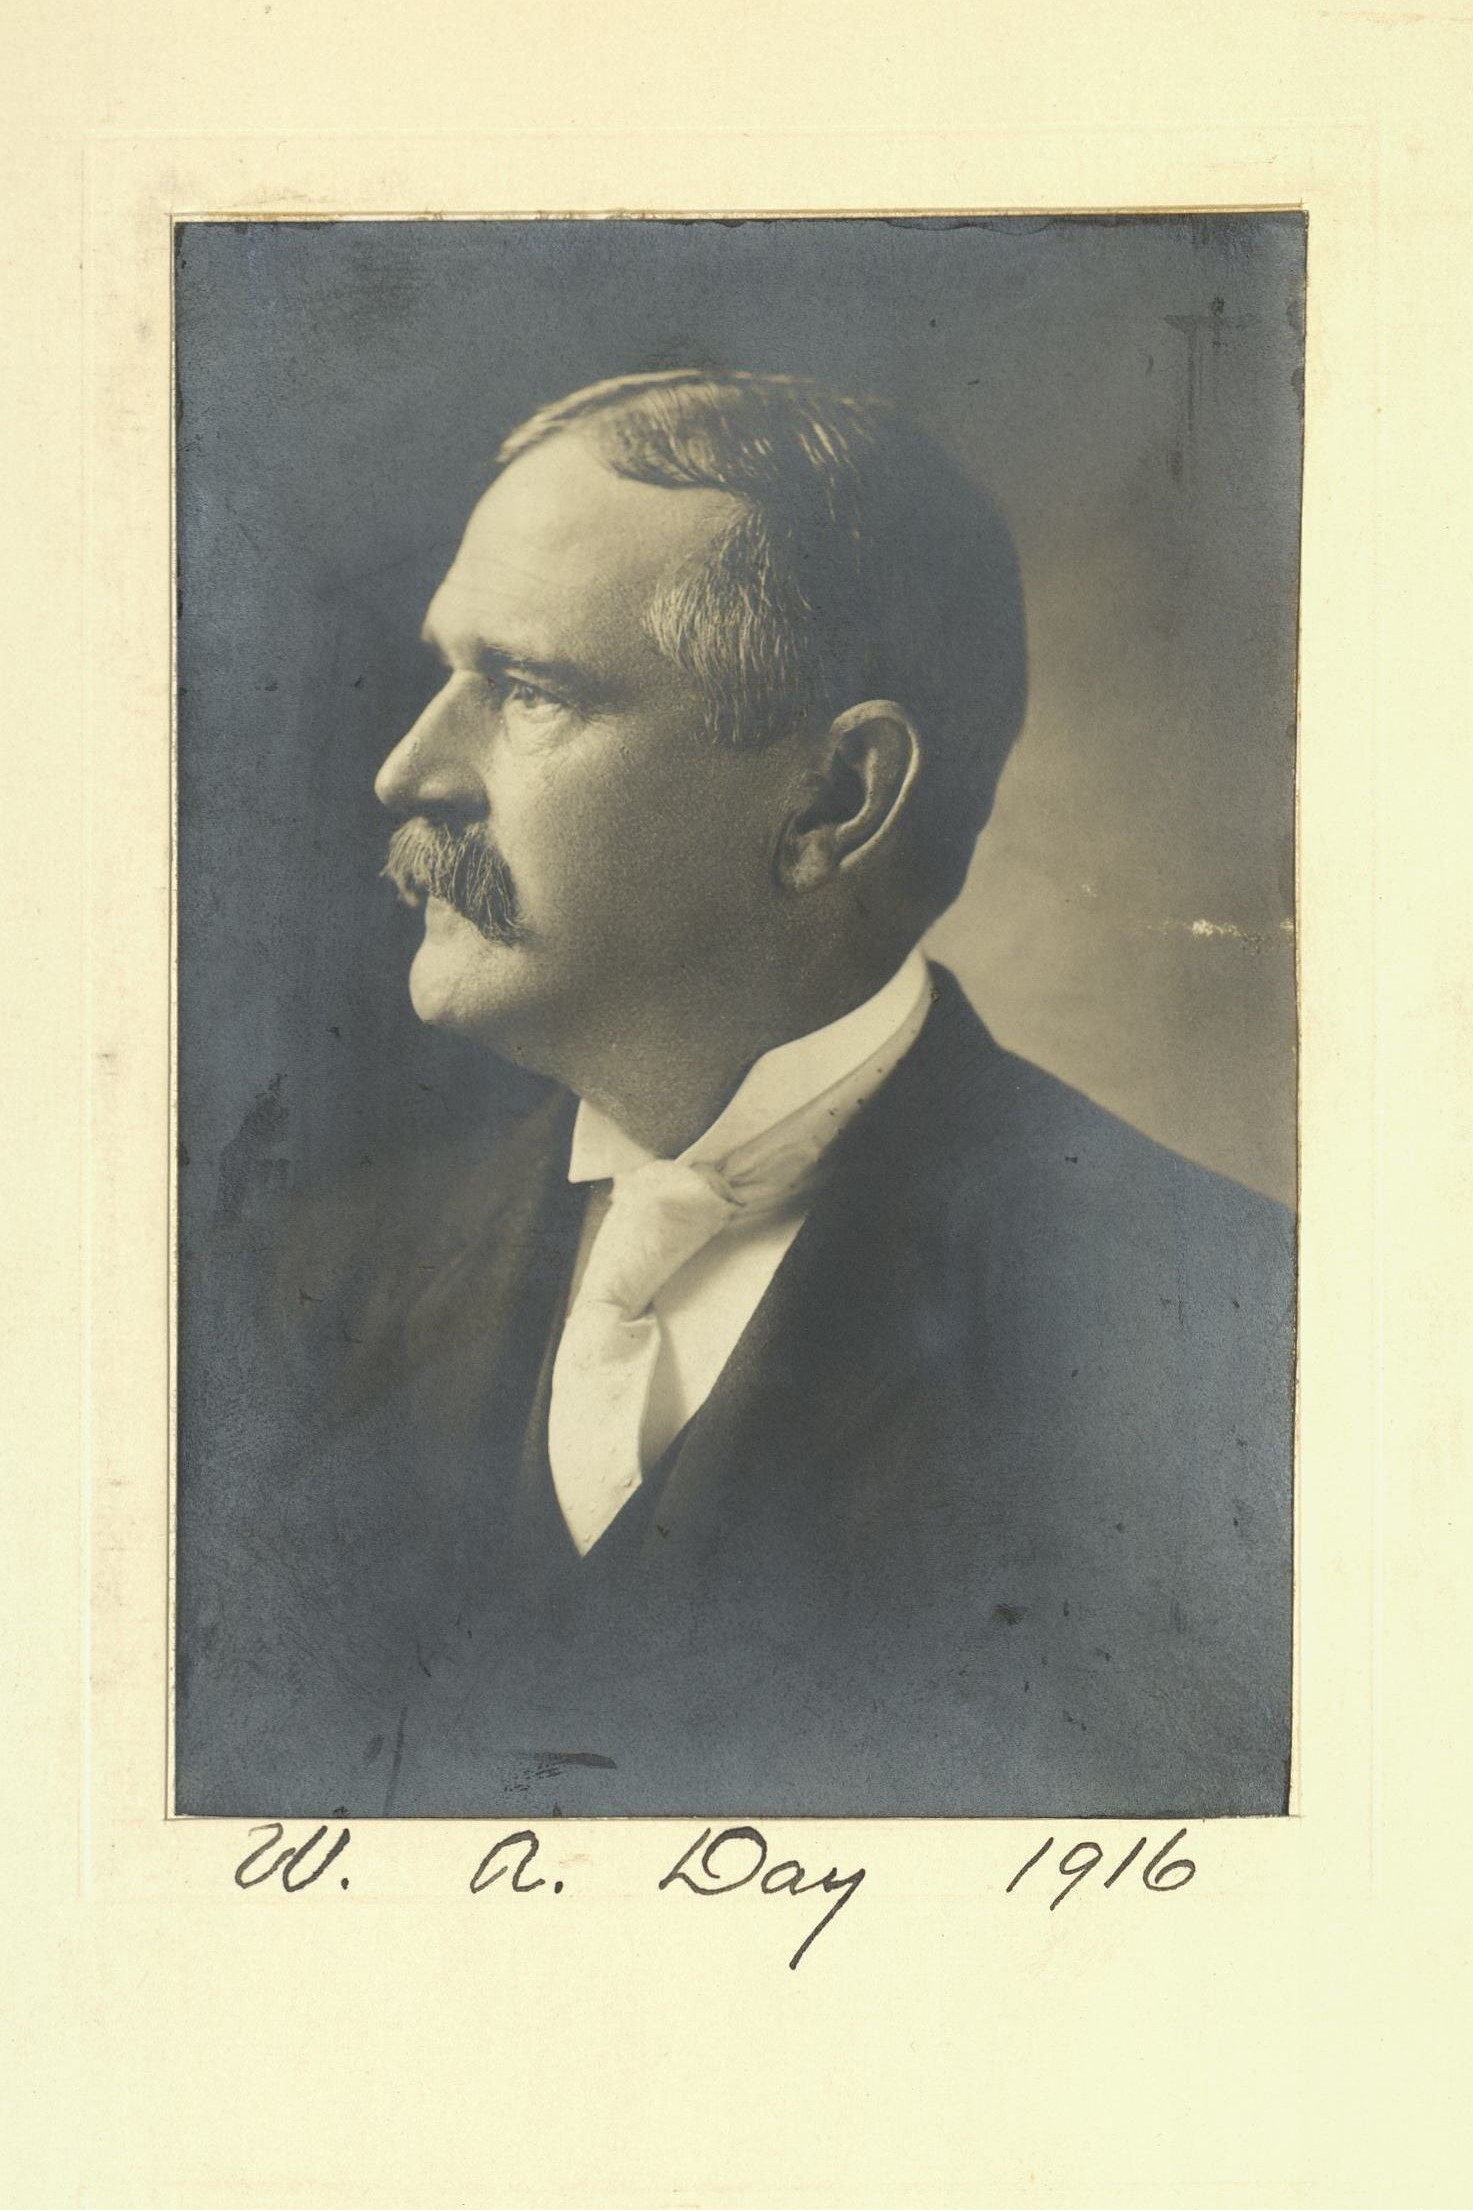 Member portrait of William A. Day